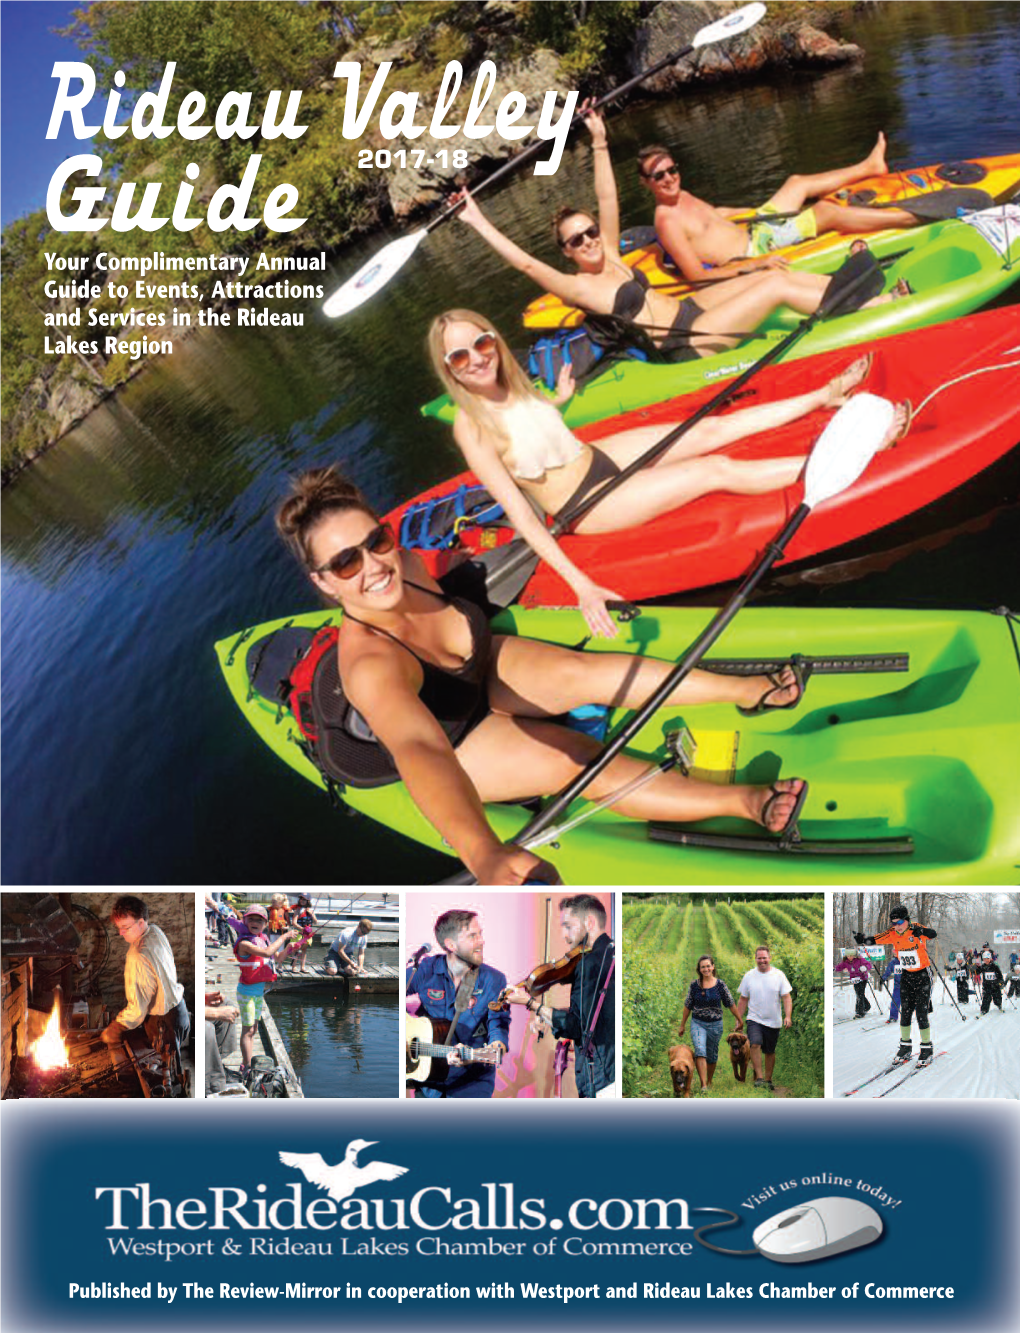 Download the 2017-18 Visitors Guide